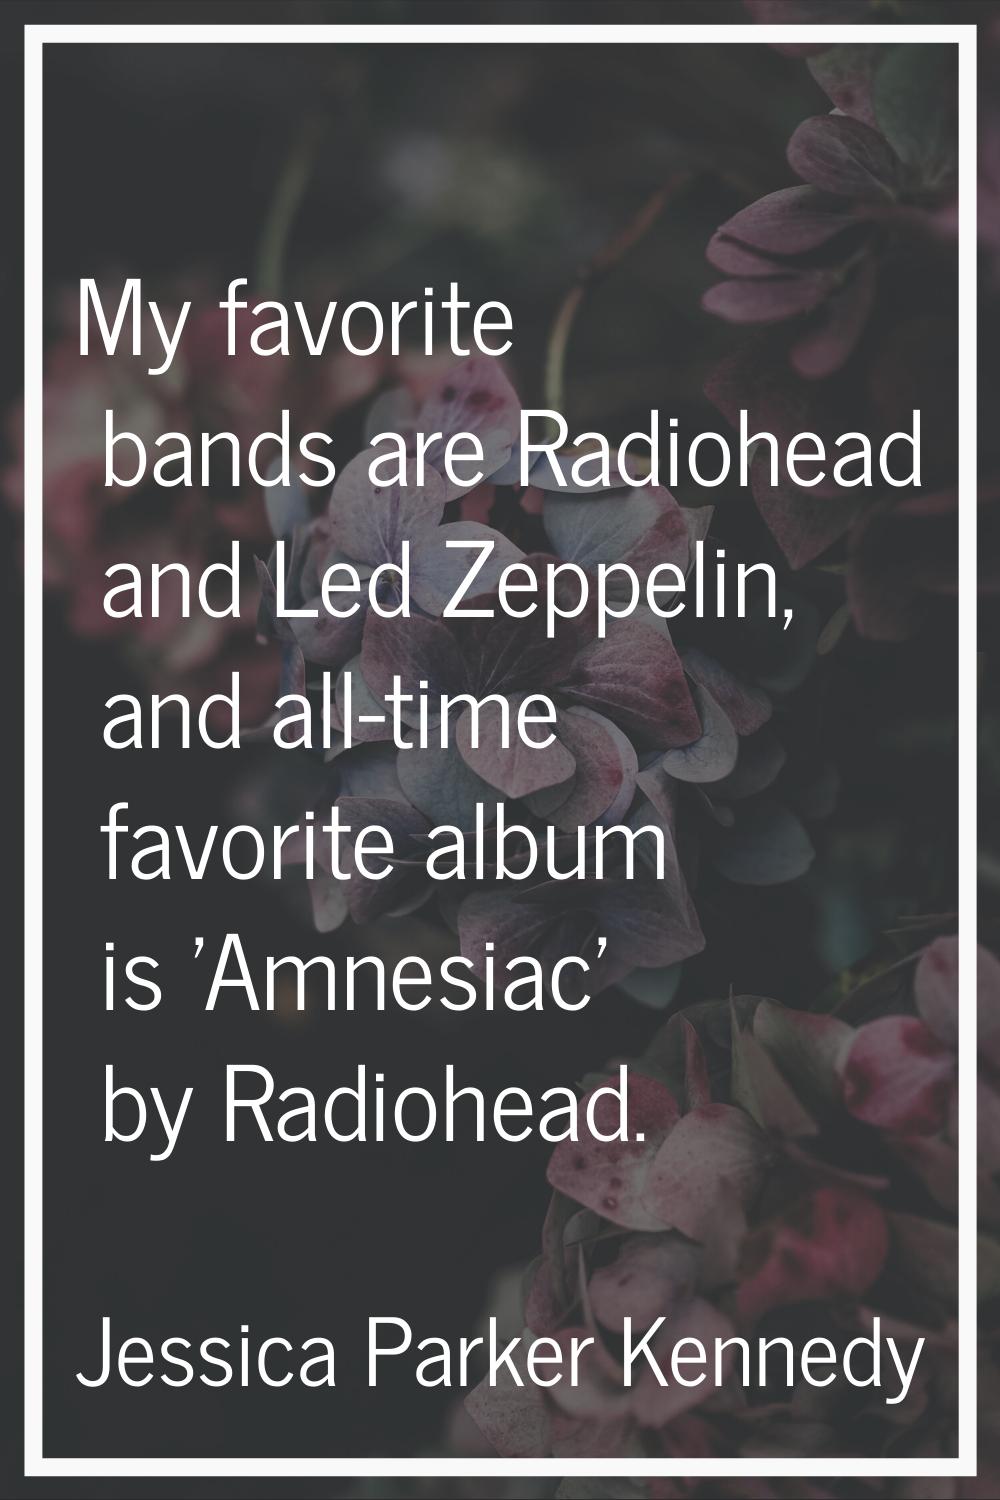 My favorite bands are Radiohead and Led Zeppelin, and all-time favorite album is 'Amnesiac' by Radi